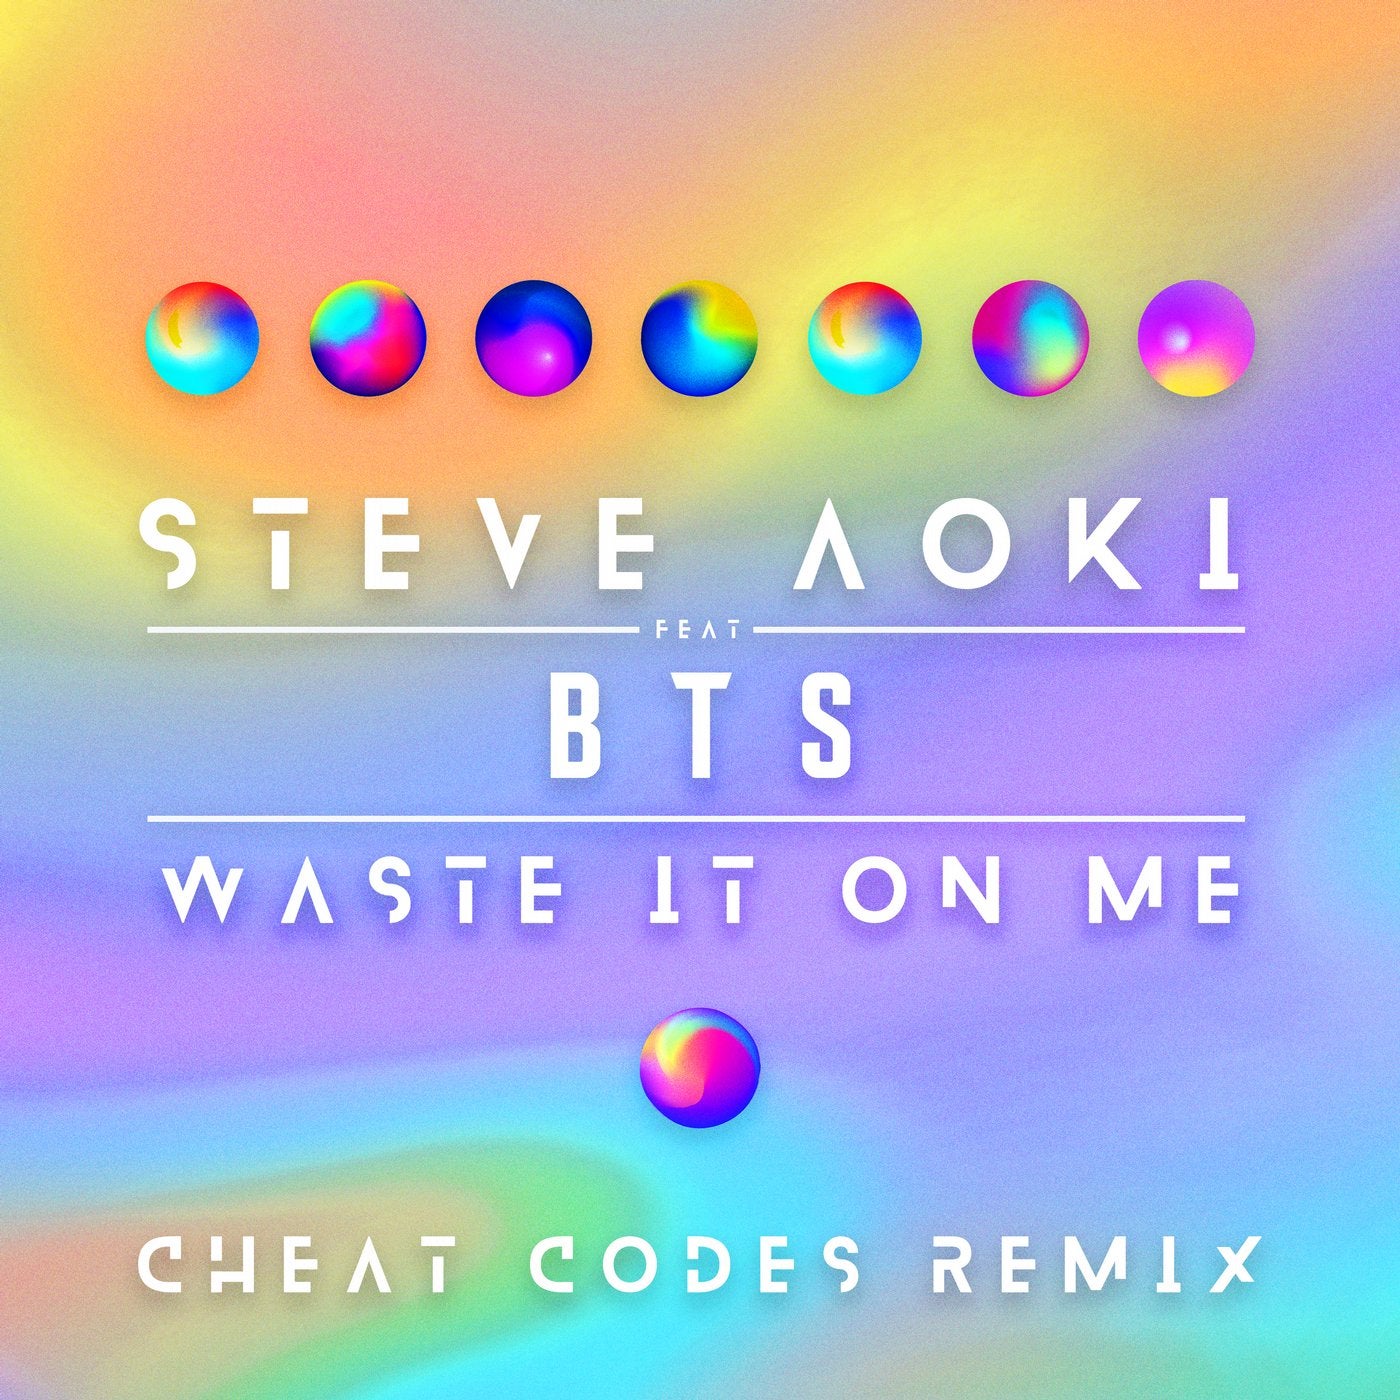 Waste It On Me - Cheat Codes Remix